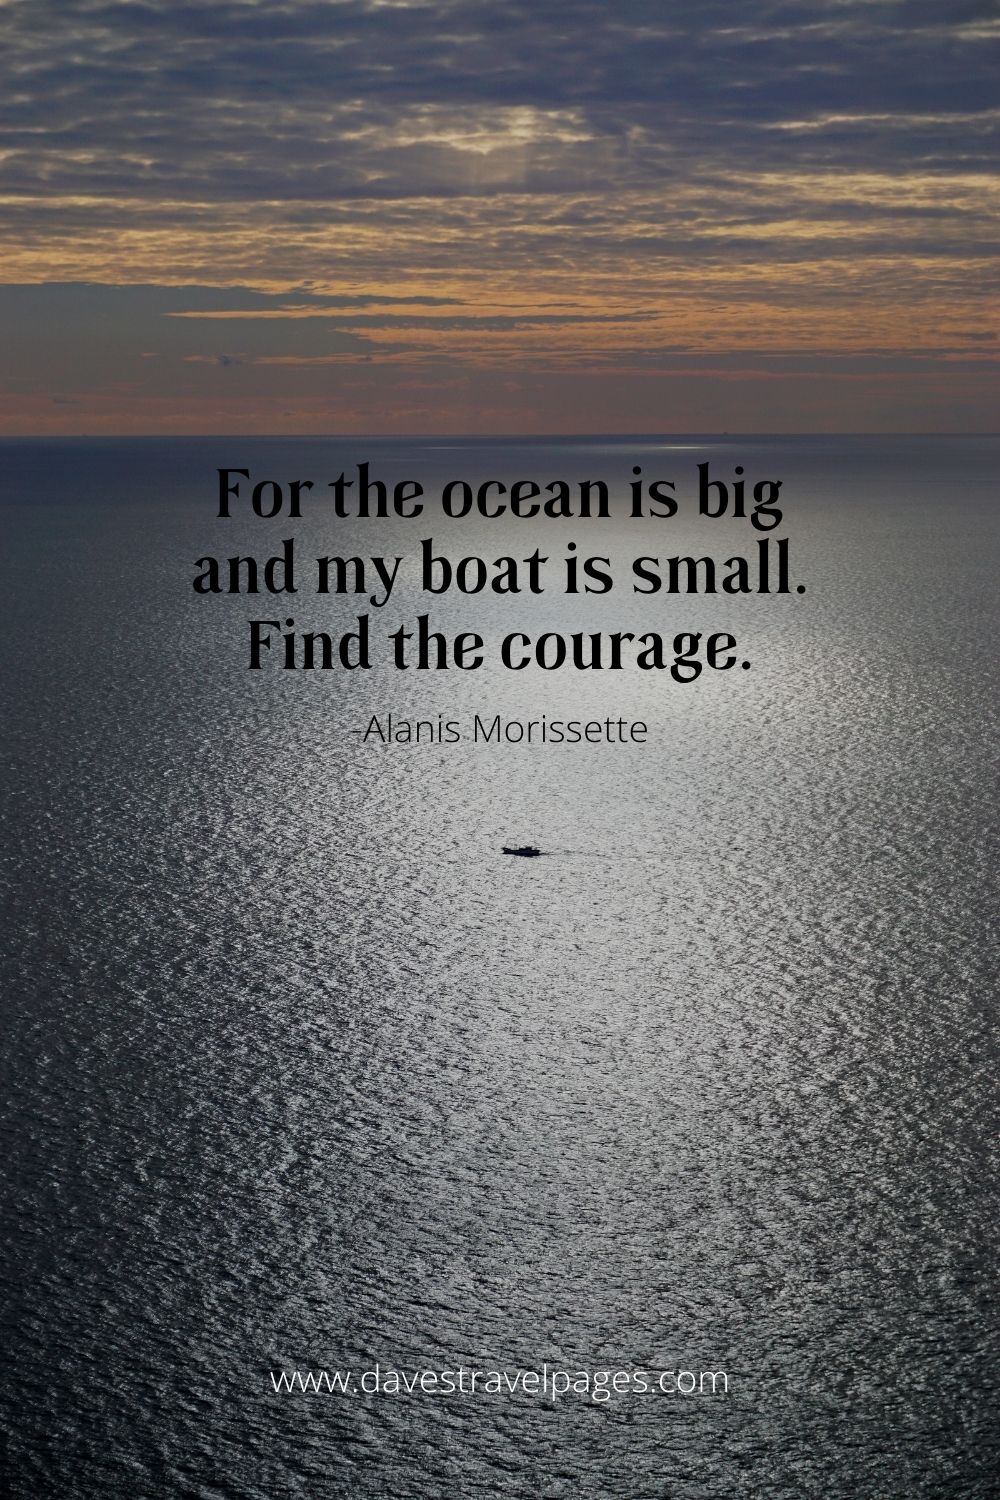 For the ocean is big and my boat is small. Find the courage.